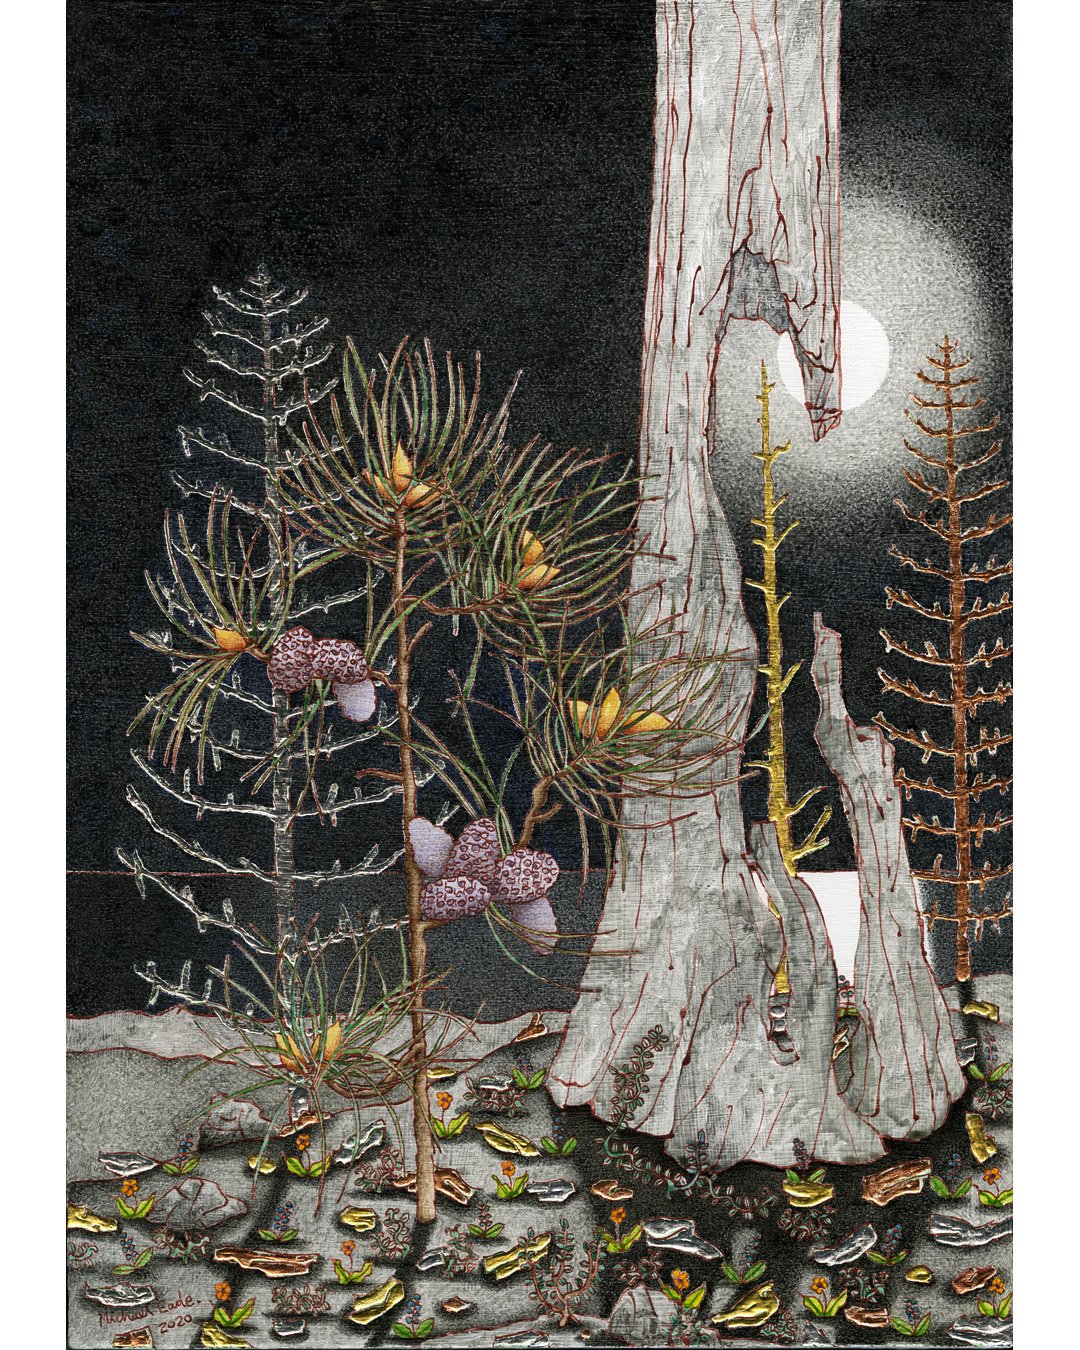  Michael Eade,  Pine Tree Sapling (Small), No. 5, Under Full Moon , 2020. Egg tempera, raised 22k gold leaf, raised copper and aluminum leaf on wood panel, 17 x 12 inches ©Michael Eade, courtesy Fou Gallery 